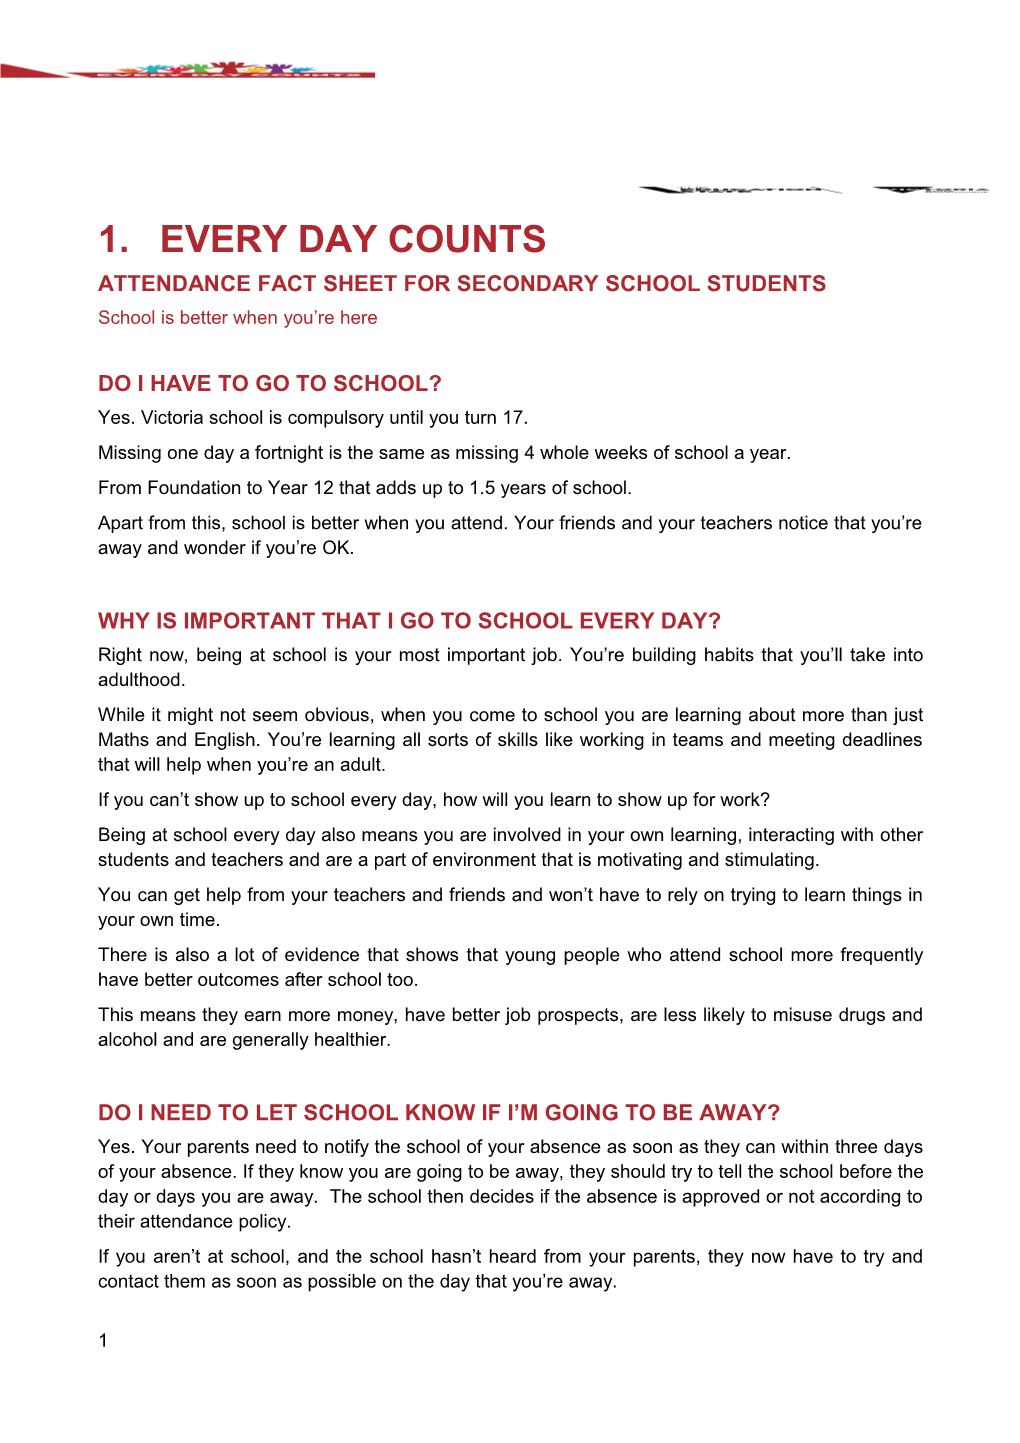 Attendance Fact Sheet for Secondary School Students